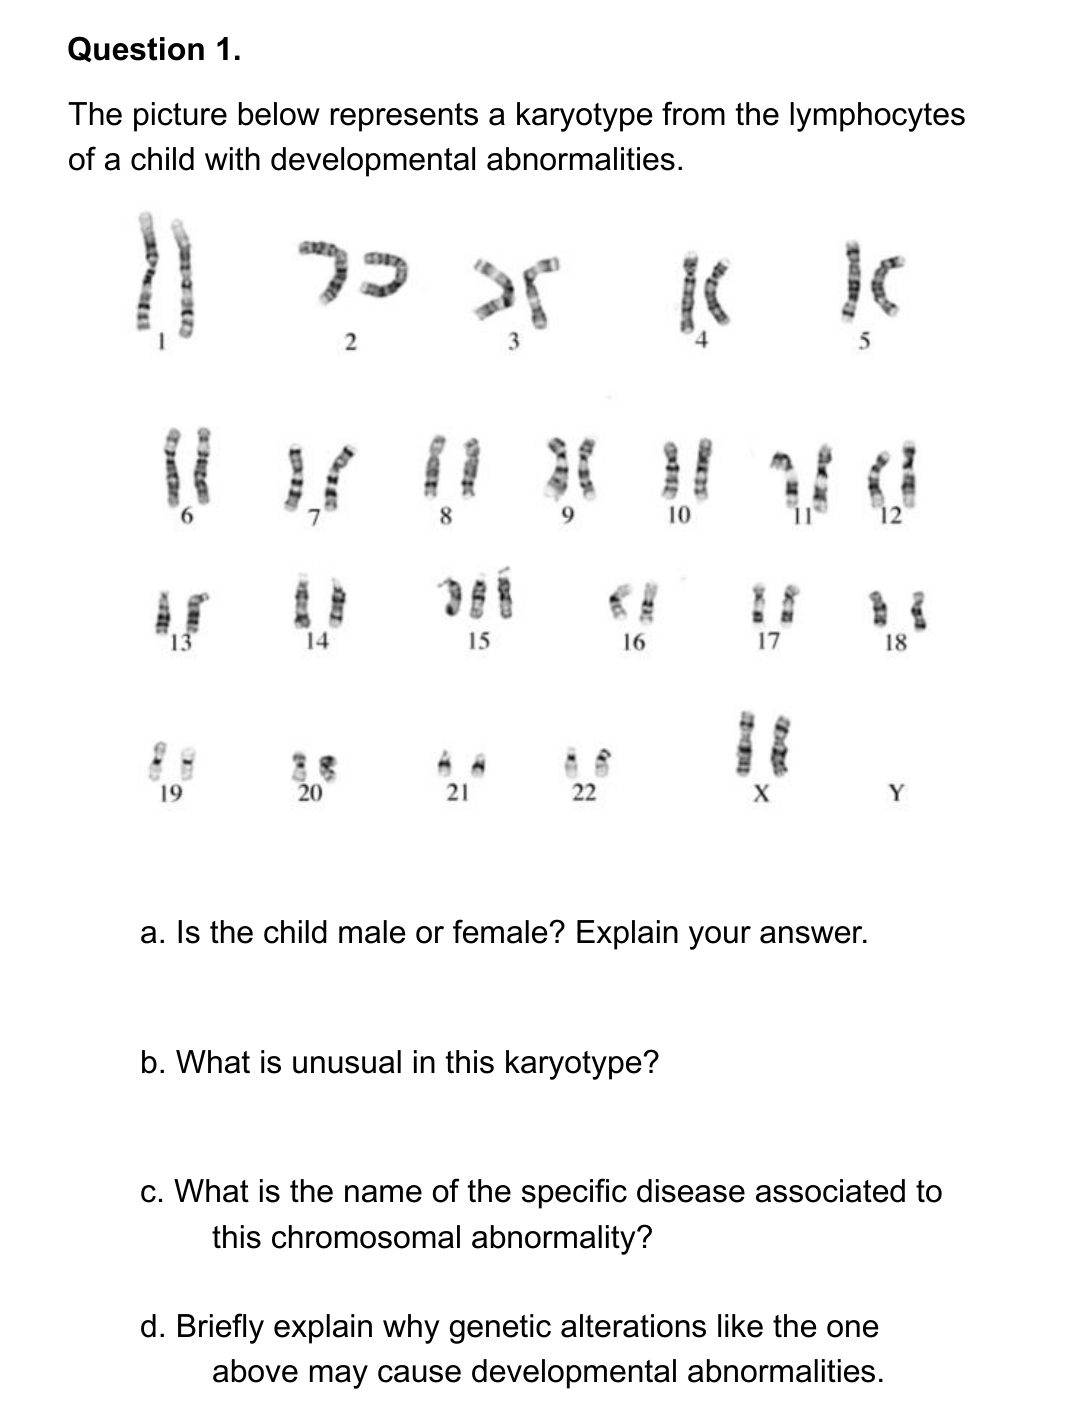 Question 1.
The picture below represents a karyotype from the lymphocytes
of a child with developmental abnormalities.
11 2² 35 K K
13
19
14
20
15
21
22
16
10
b. What is unusual in this karyotype?
17
it
X
a. Is the child male or female? Explain your answer.
18
c. What is the name of the specific disease associated to
this chromosomal abnormality?
d. Briefly explain why genetic alterations like the one
above may cause developmental abnormalities.